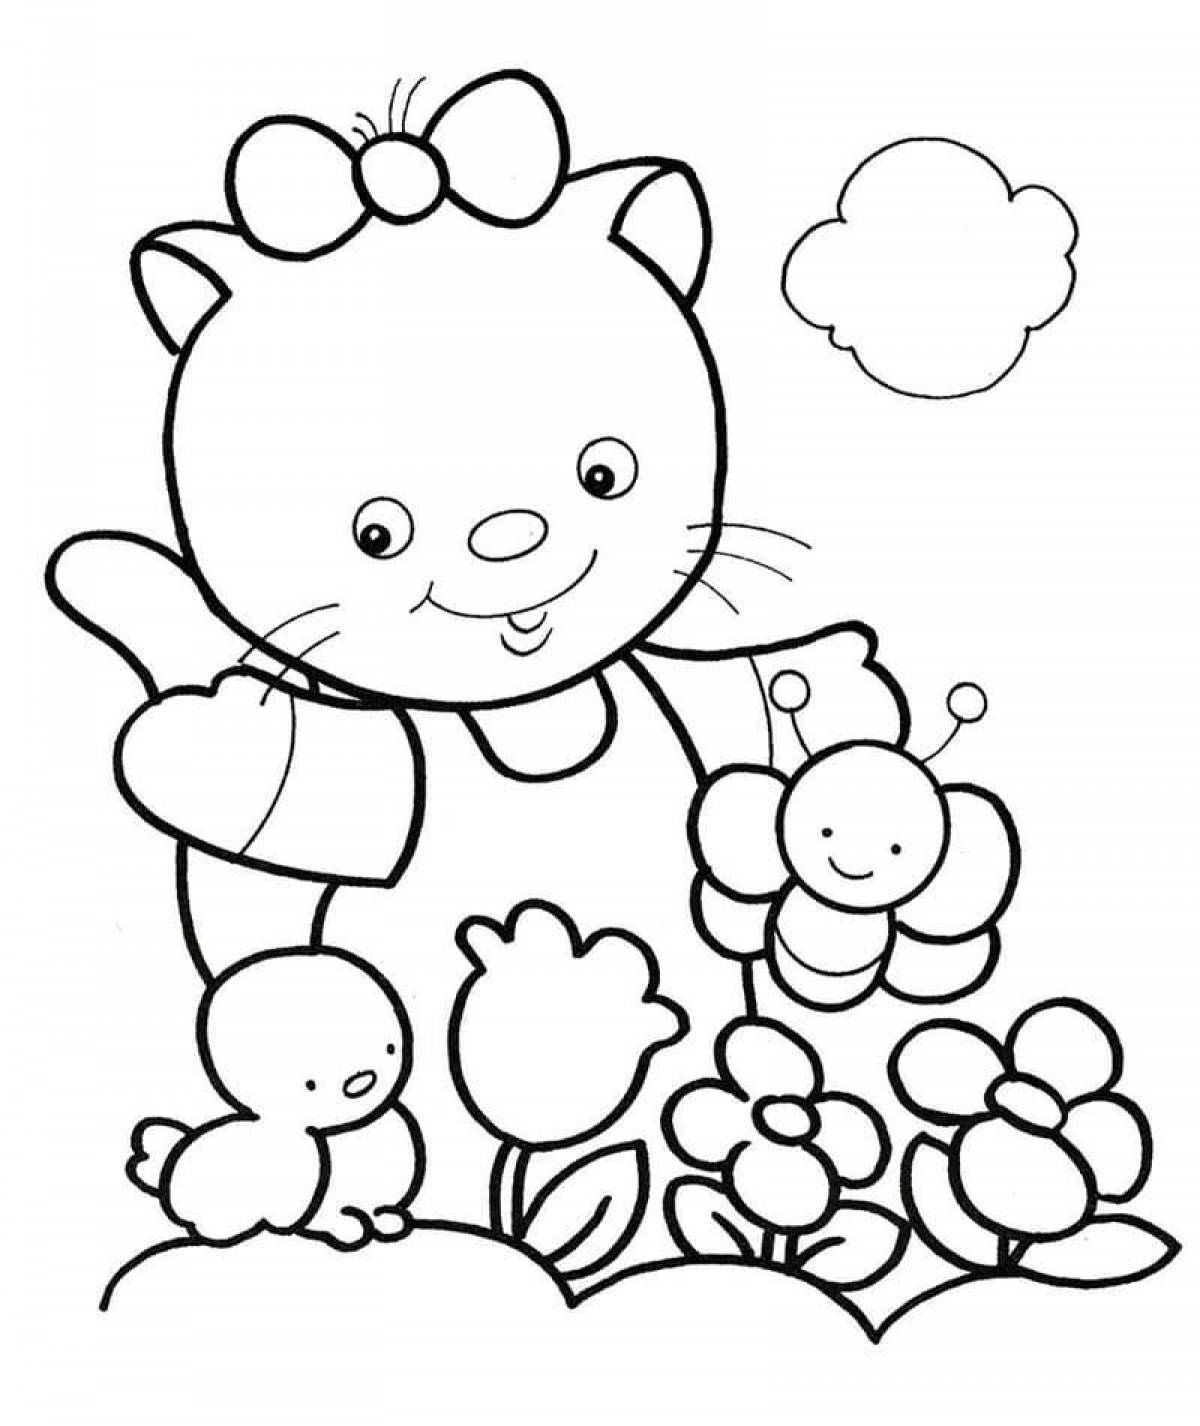 Playful coloring book for 4-5 year olds